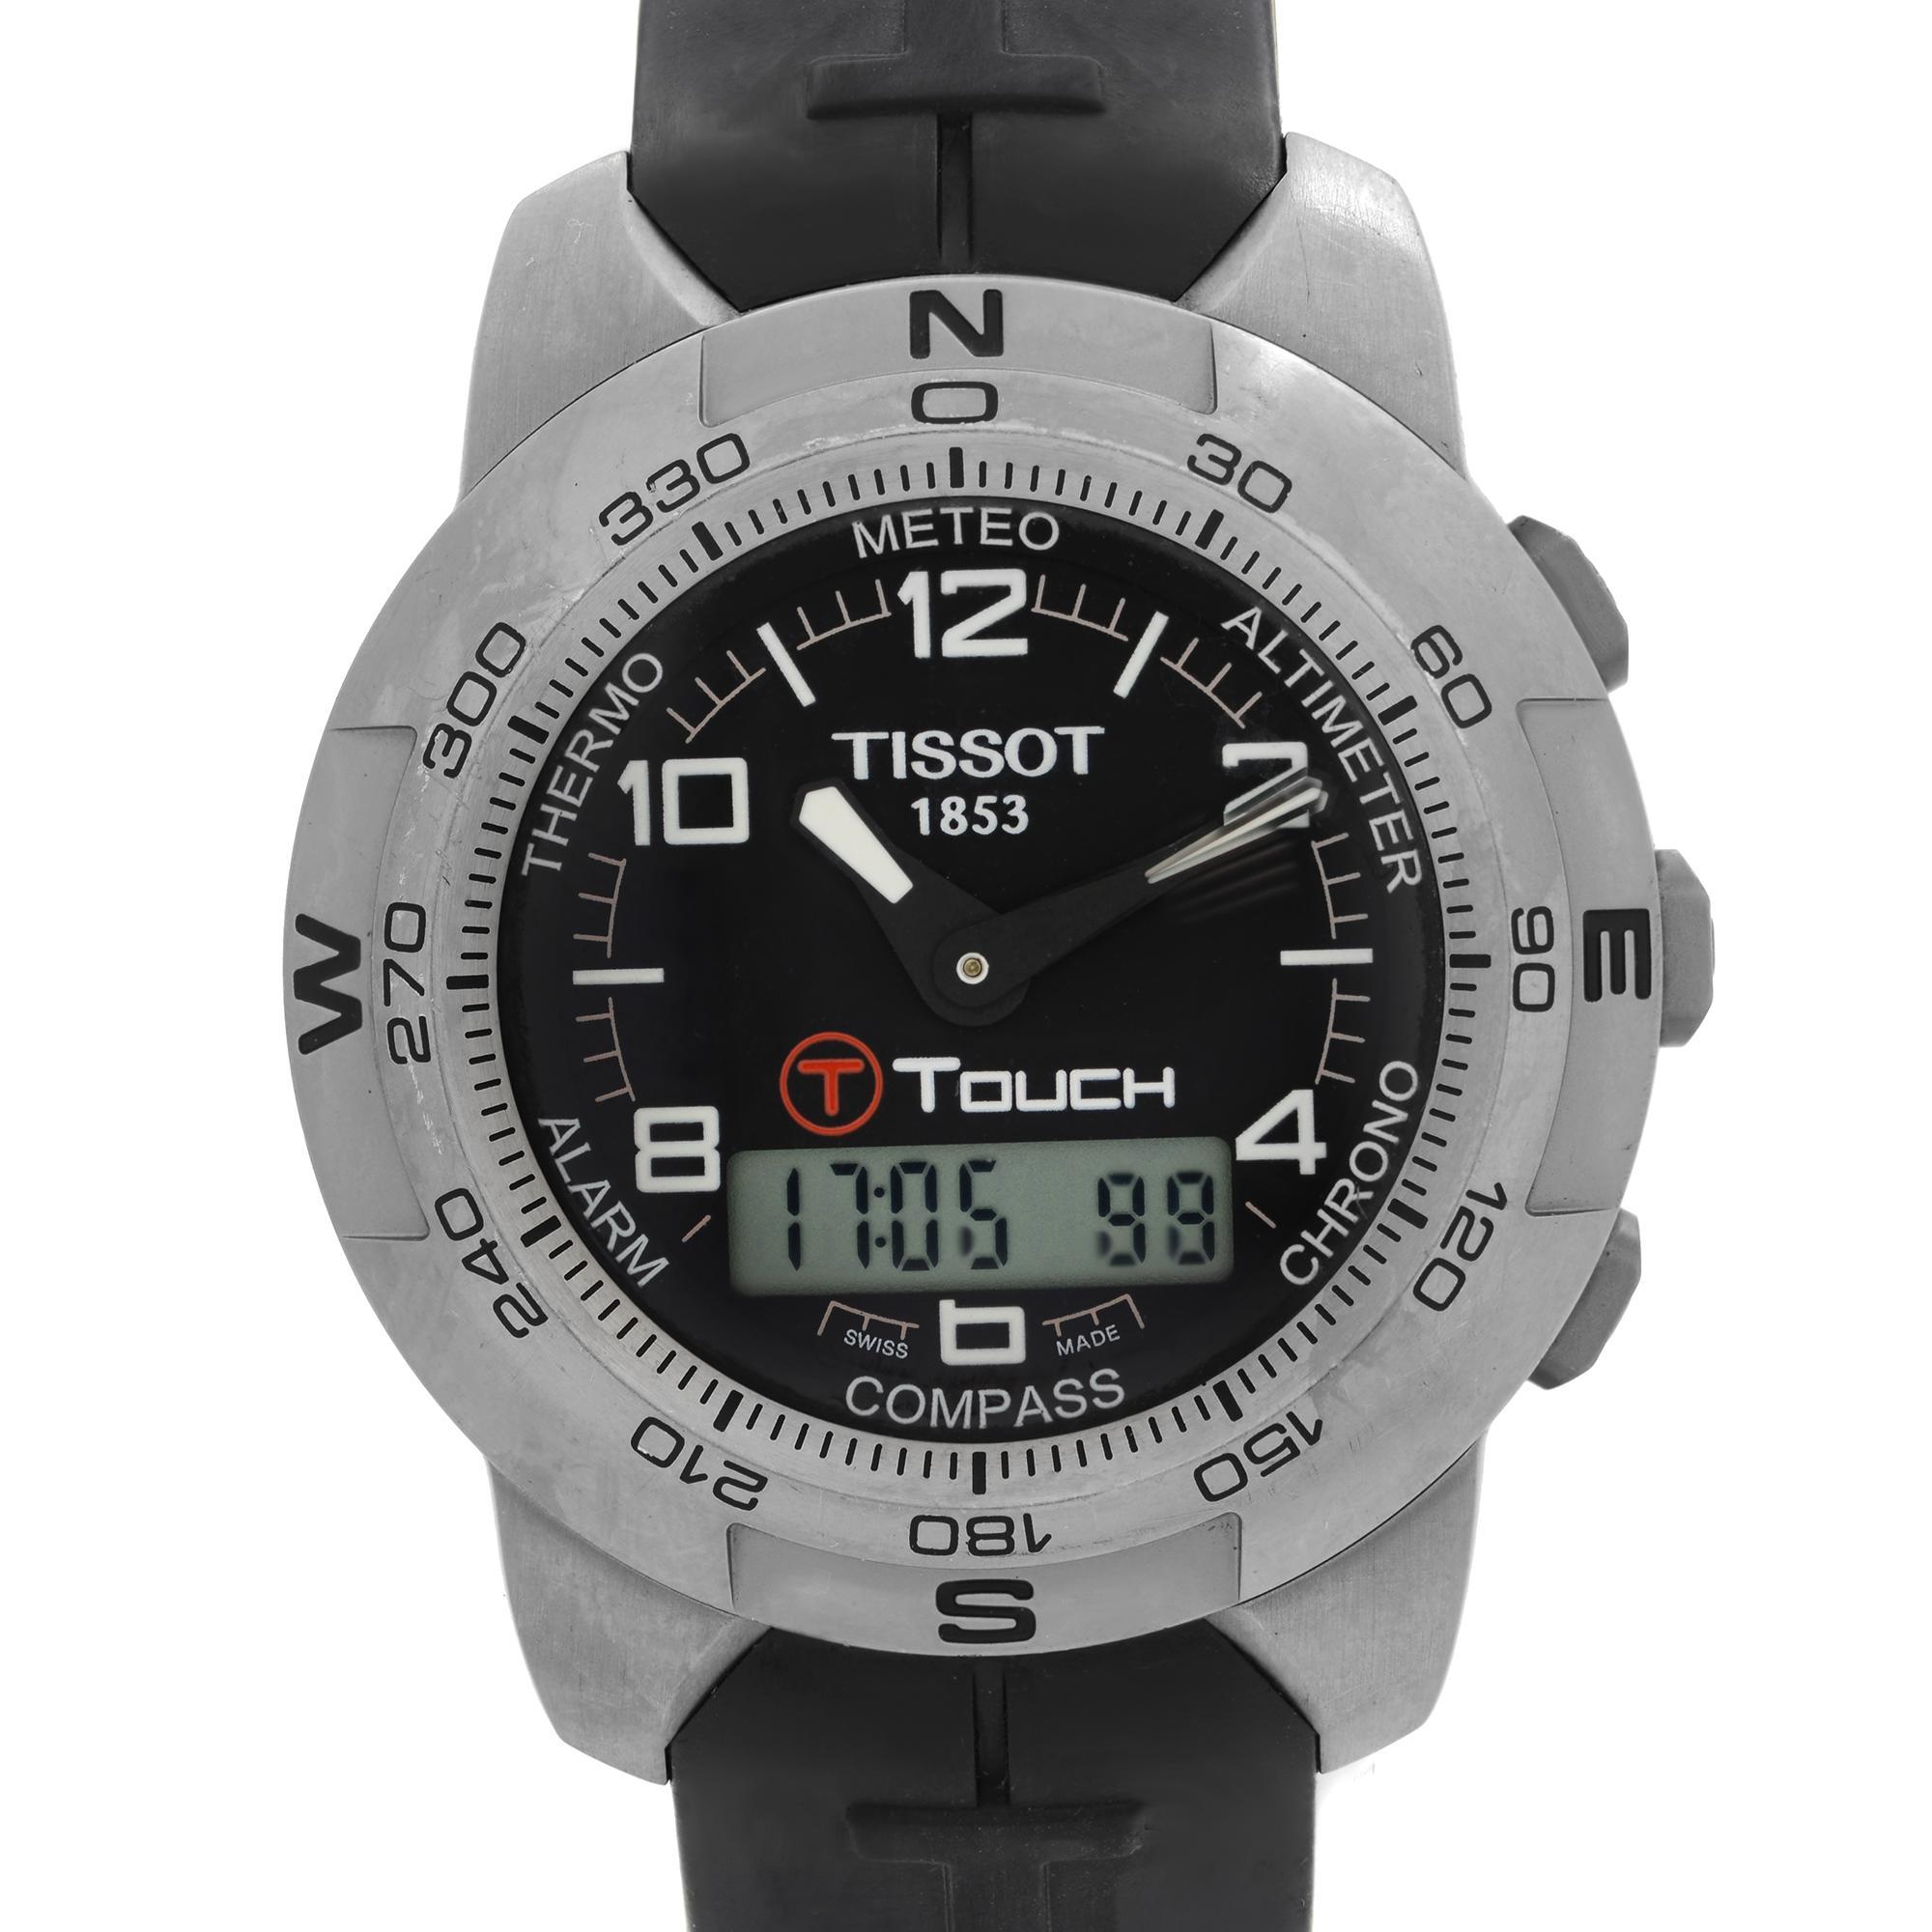 Pre-owned Tissot T-Touch Titanium Digital Black Dial Quartz Watch T047.420.47.057.00. Scratches on the Case, Bezel, and Clasp. This Beautiful Timepiece is Powered by Quartz (Battery) Movement and Features: Round Titanium Case with a Black Rubber